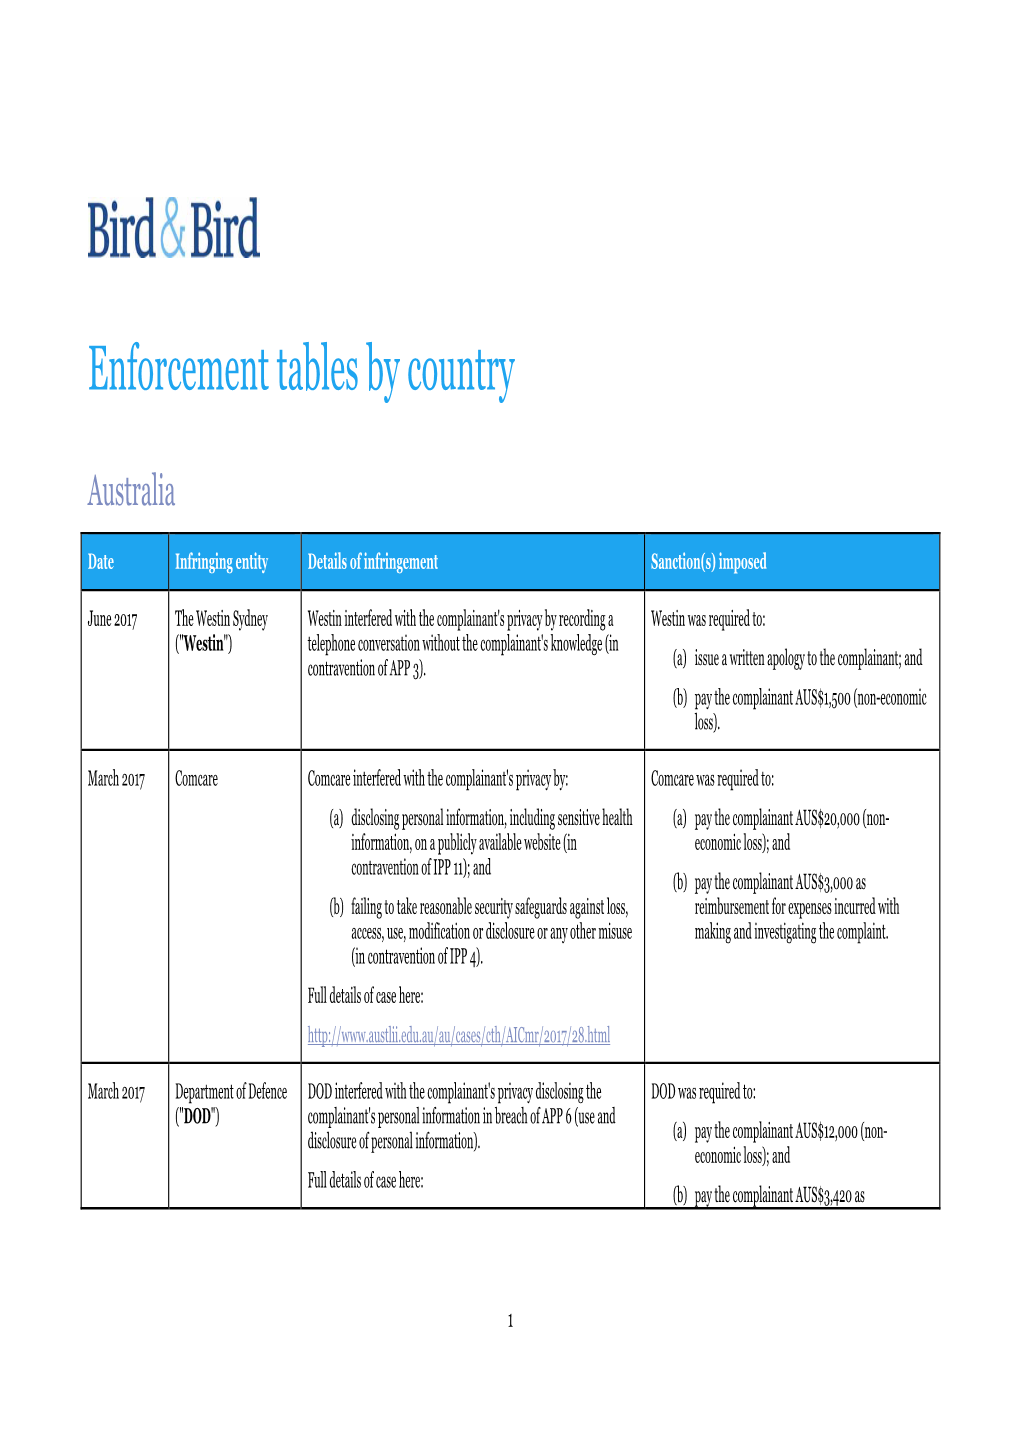 Enforcement Tables by Country